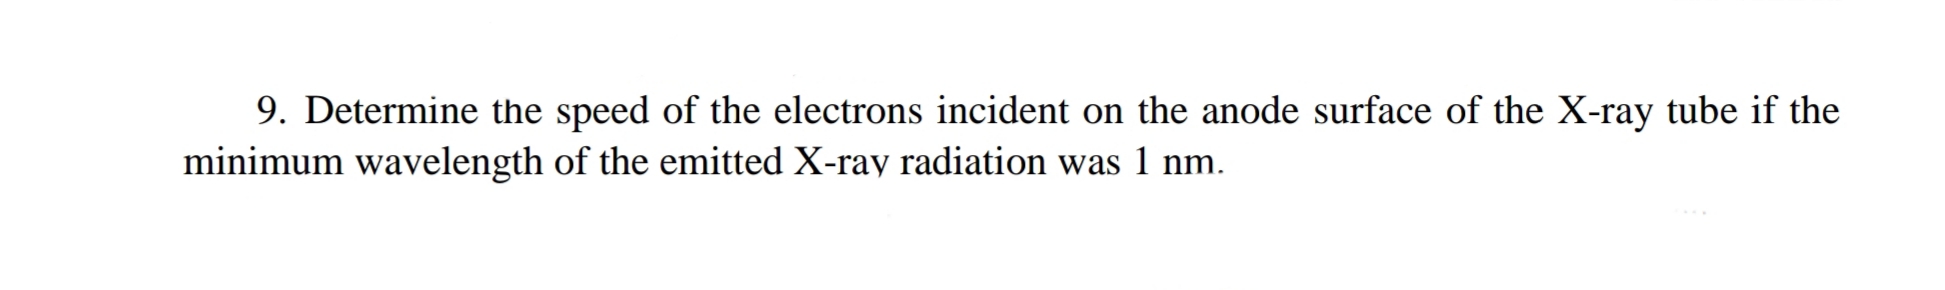 9. Determine the speed of the electrons incident on the anode surface of the X-ray tube if the
minimum wavelength of the emitted X-ray radiation was 1 nm.
